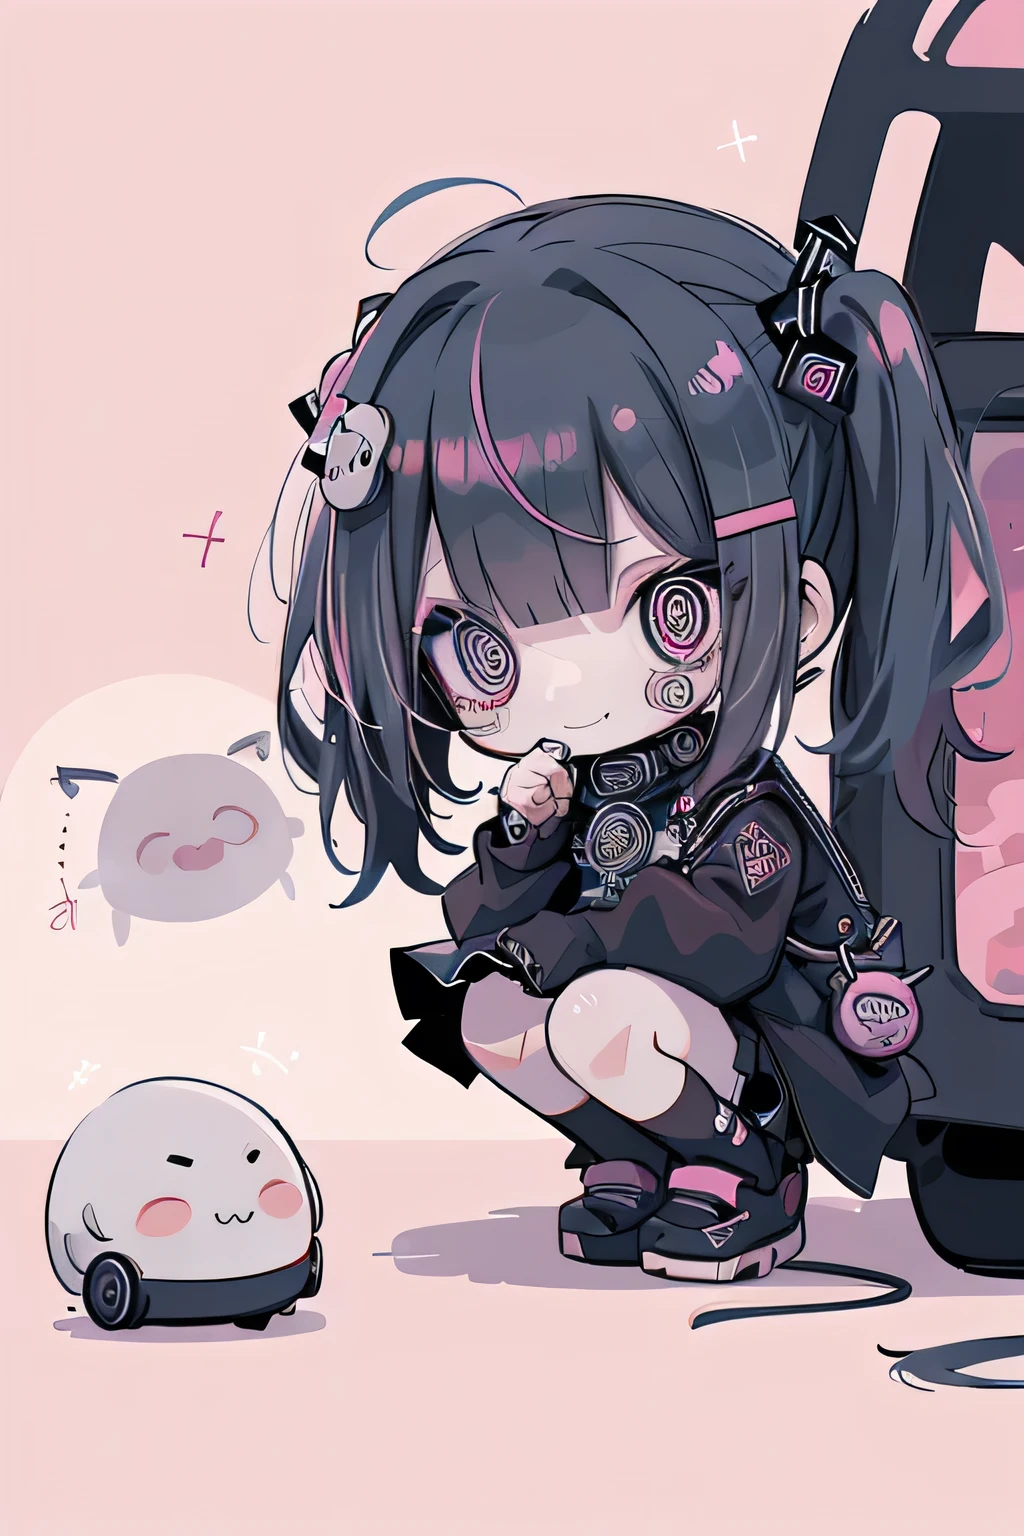 (sticker),#quality(8k,best quality, masterpiece),solo, #1girl(cute, kawaii,small kid,smile,hair floating,hair color cosmic,pigtail hair,zombie skin,ghost skin ,skin color blue,pale skin,eye color cosmic,eyes shining,big eyes,damaged clothes,heavy metal costume,smirk,isolated on pink background,full body),#background(monotone,pink,no background,isolated on pink background)